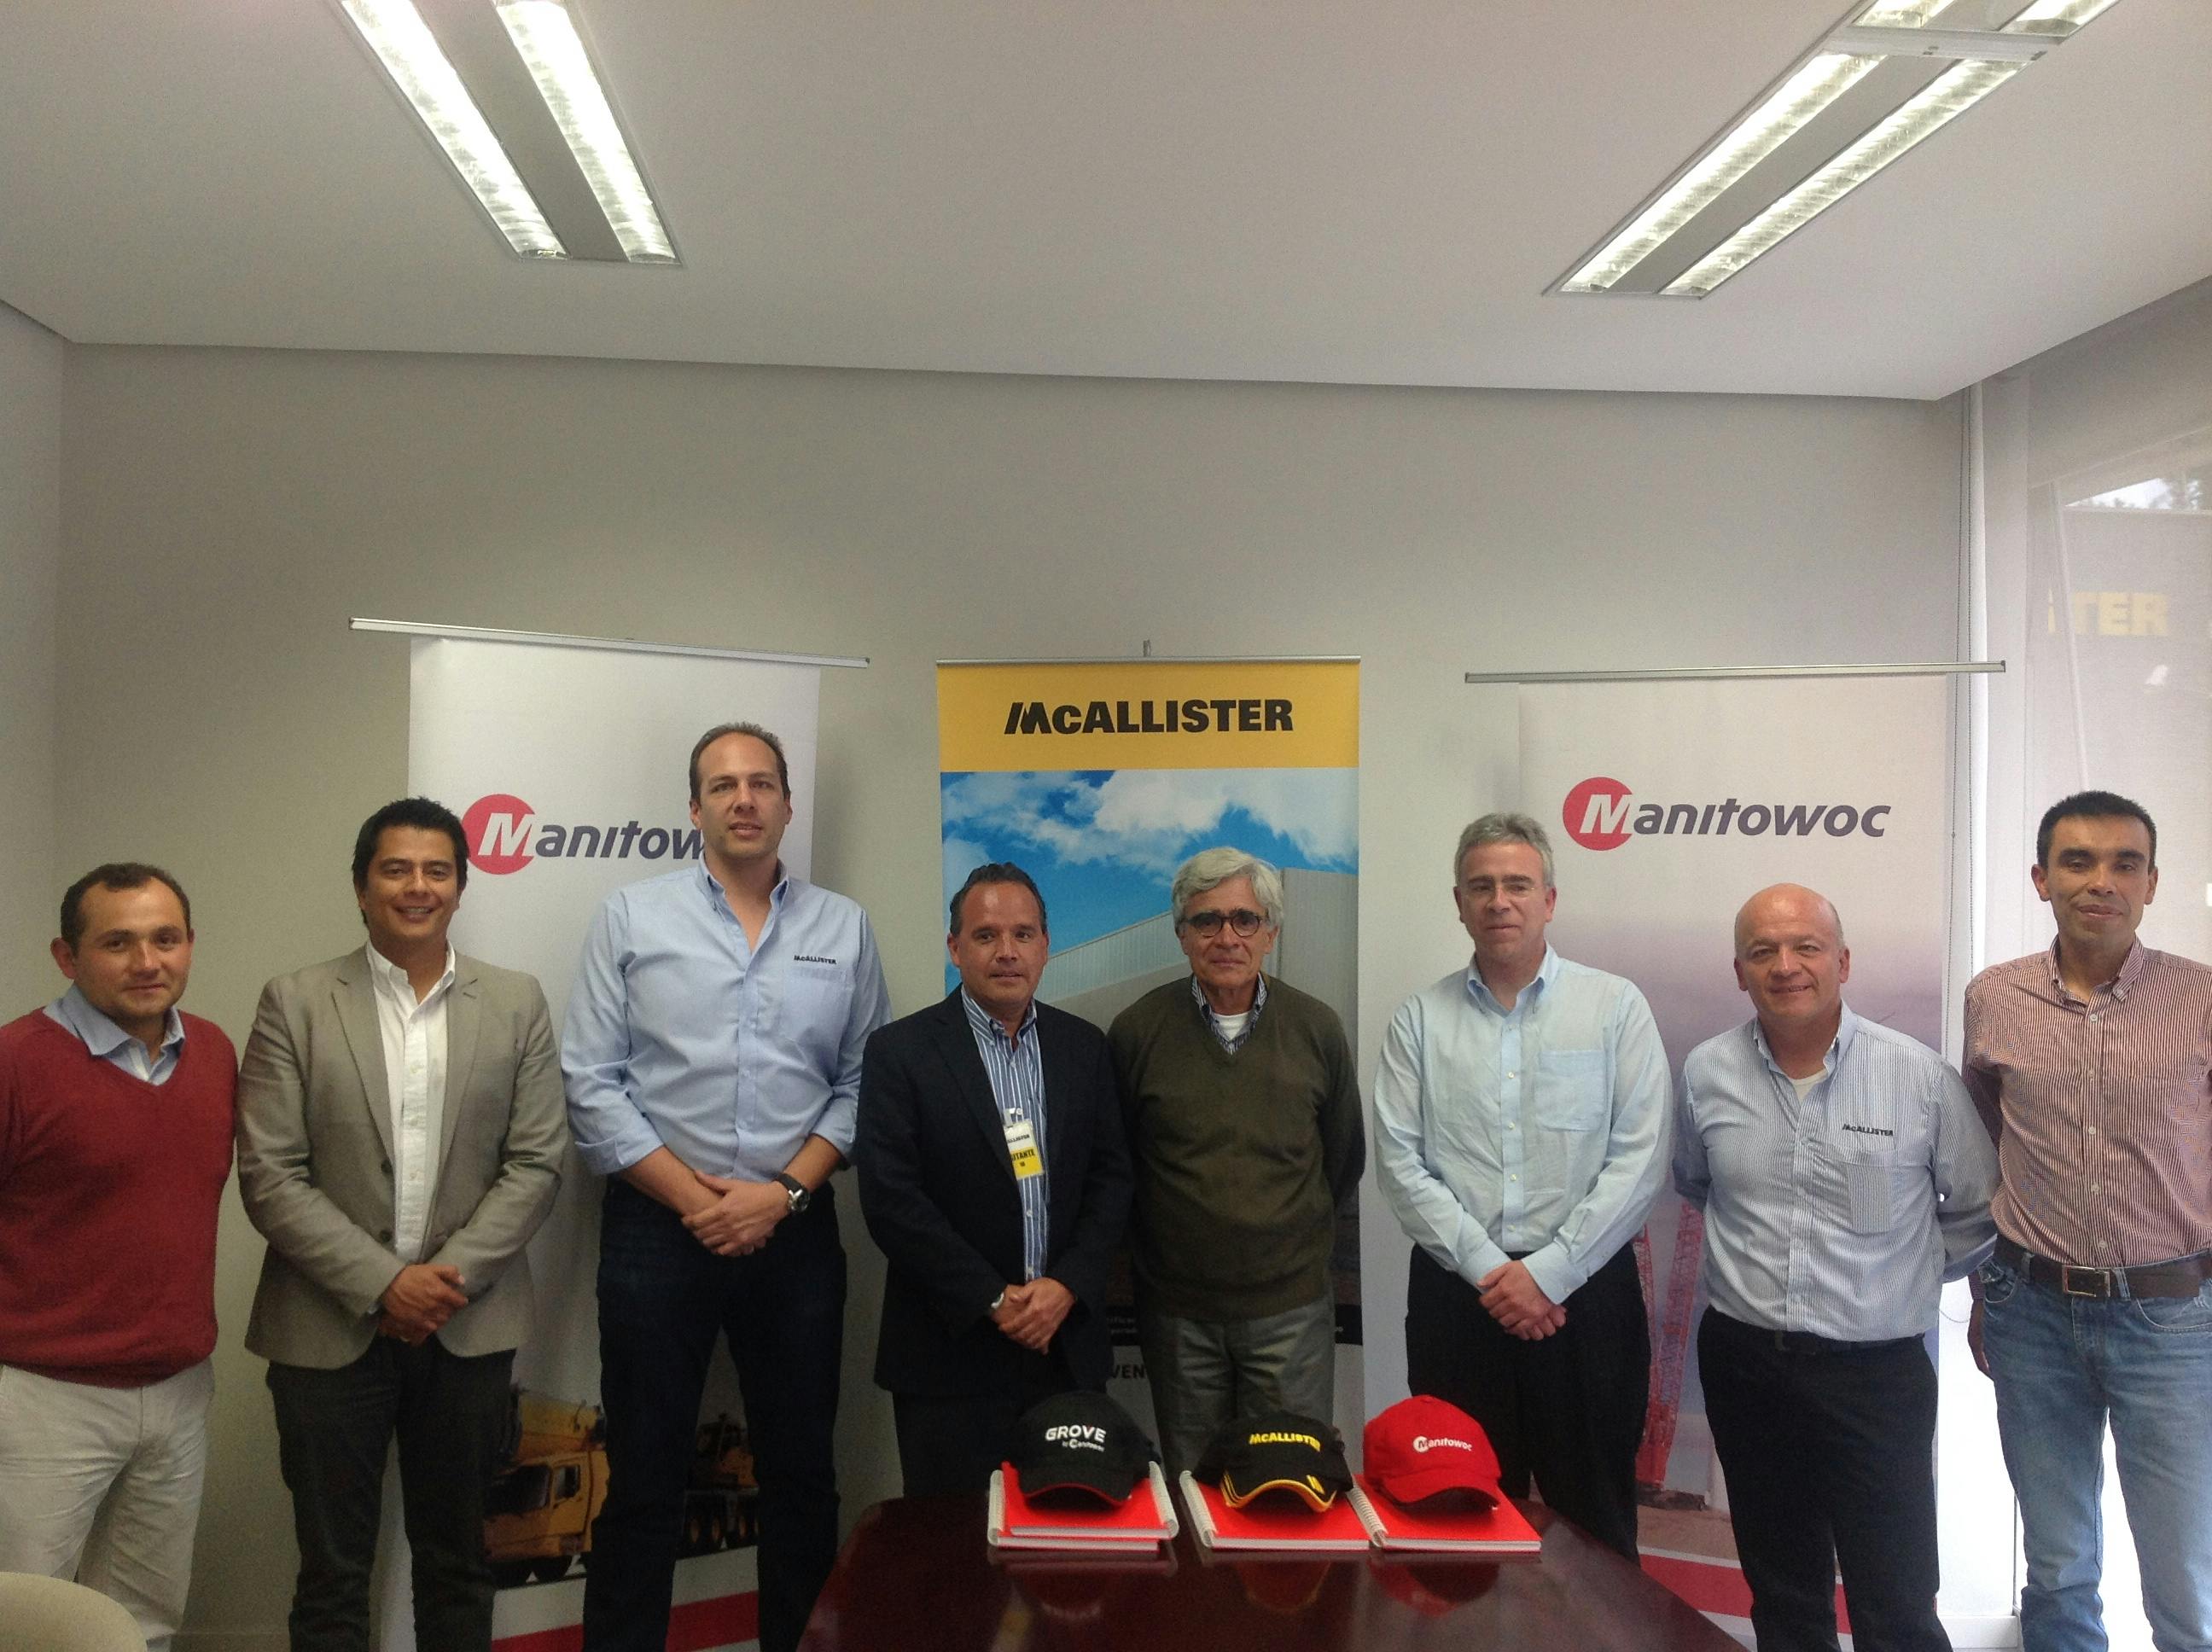 Manitowoc Signs wtih E McAllister to Provide Service in Colombia | Construction News